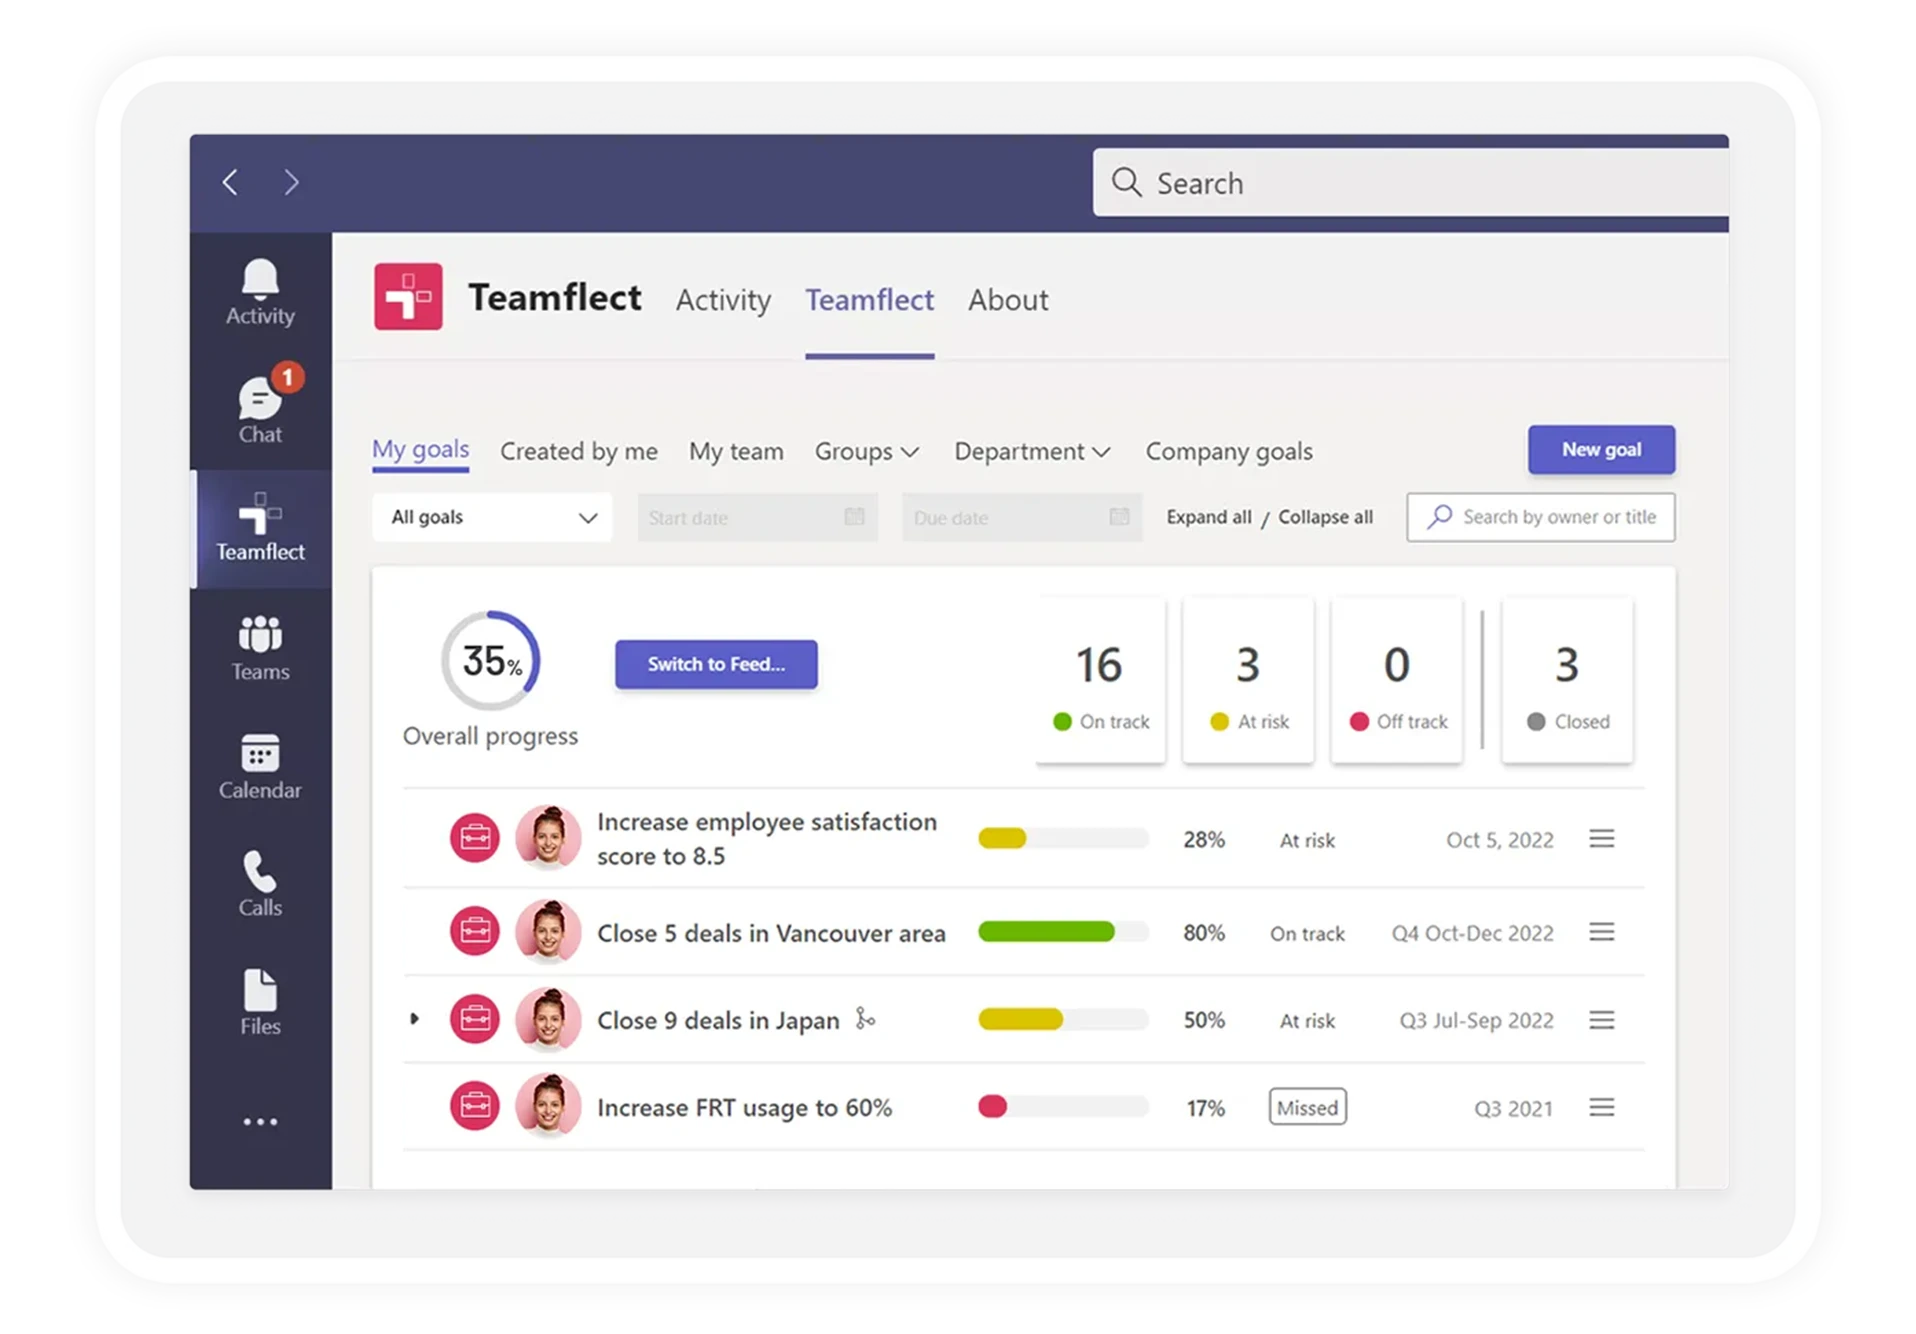 OKRs and Agile: Goal module screen of Teamflect in Microsoft Teams with one active goal